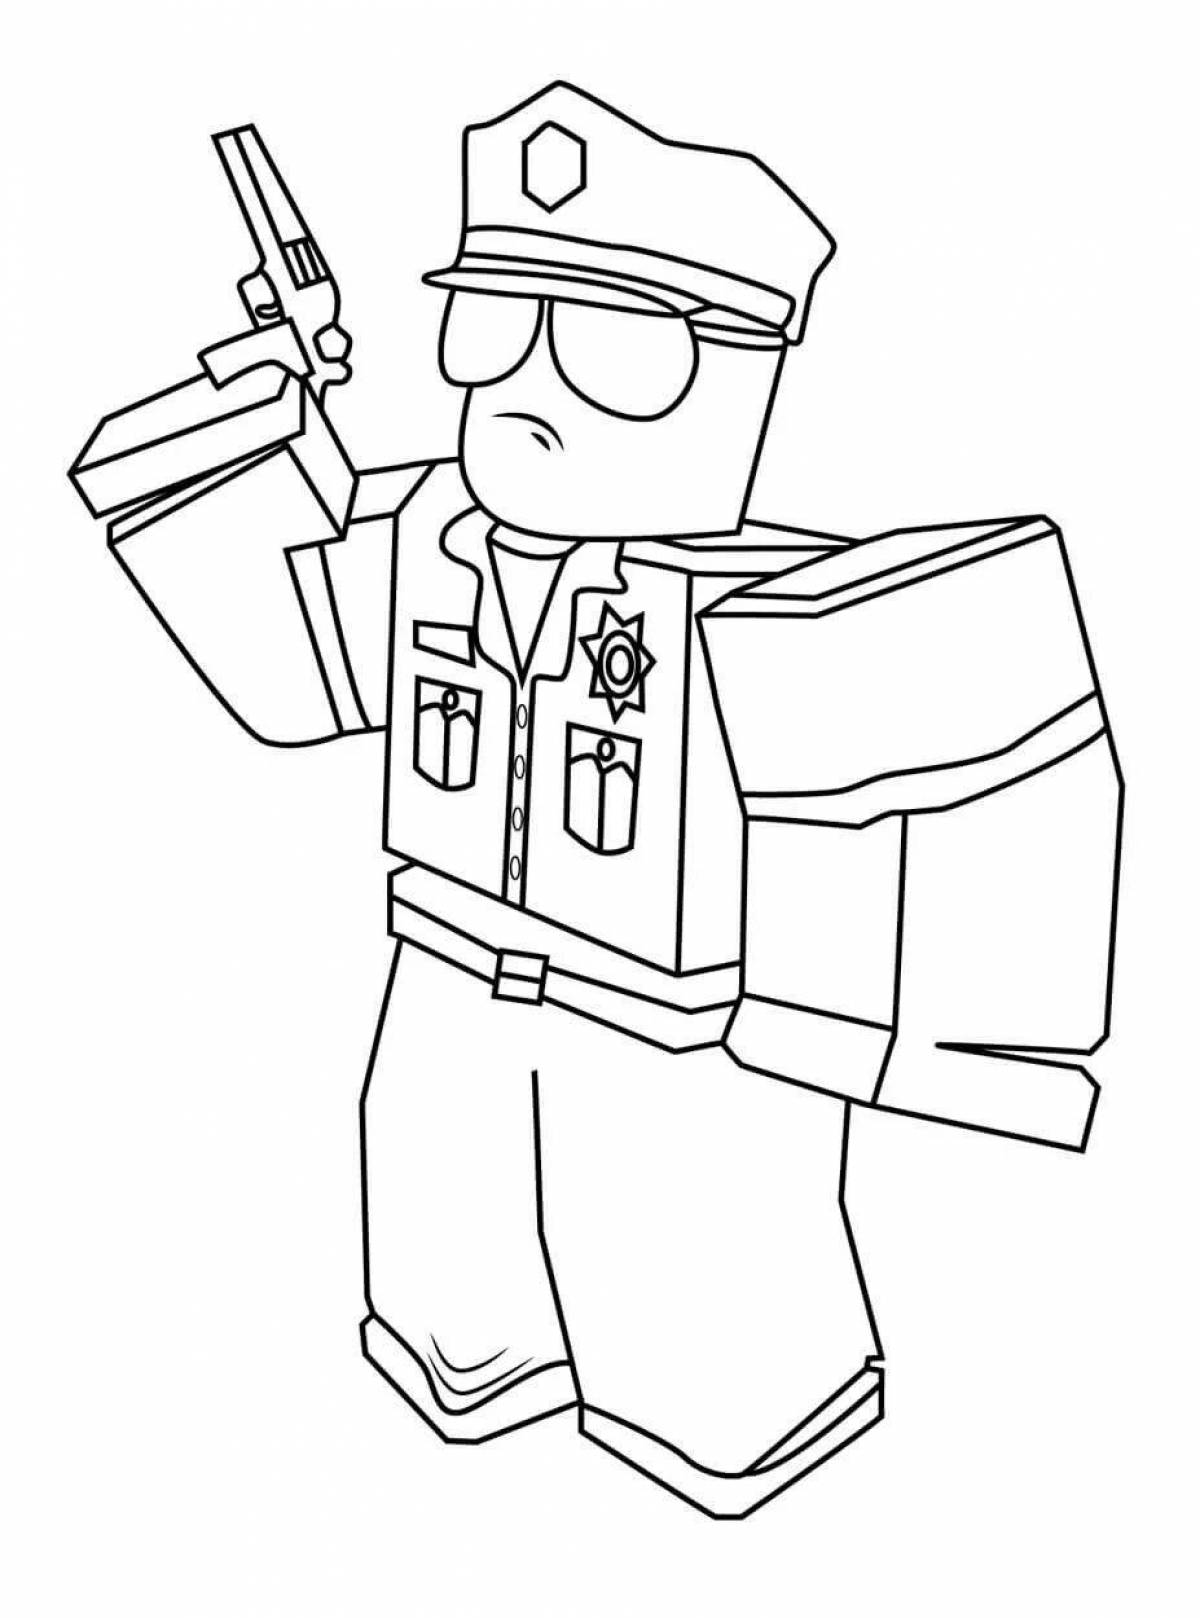 Incredible roblox coloring book for 10 year old boys